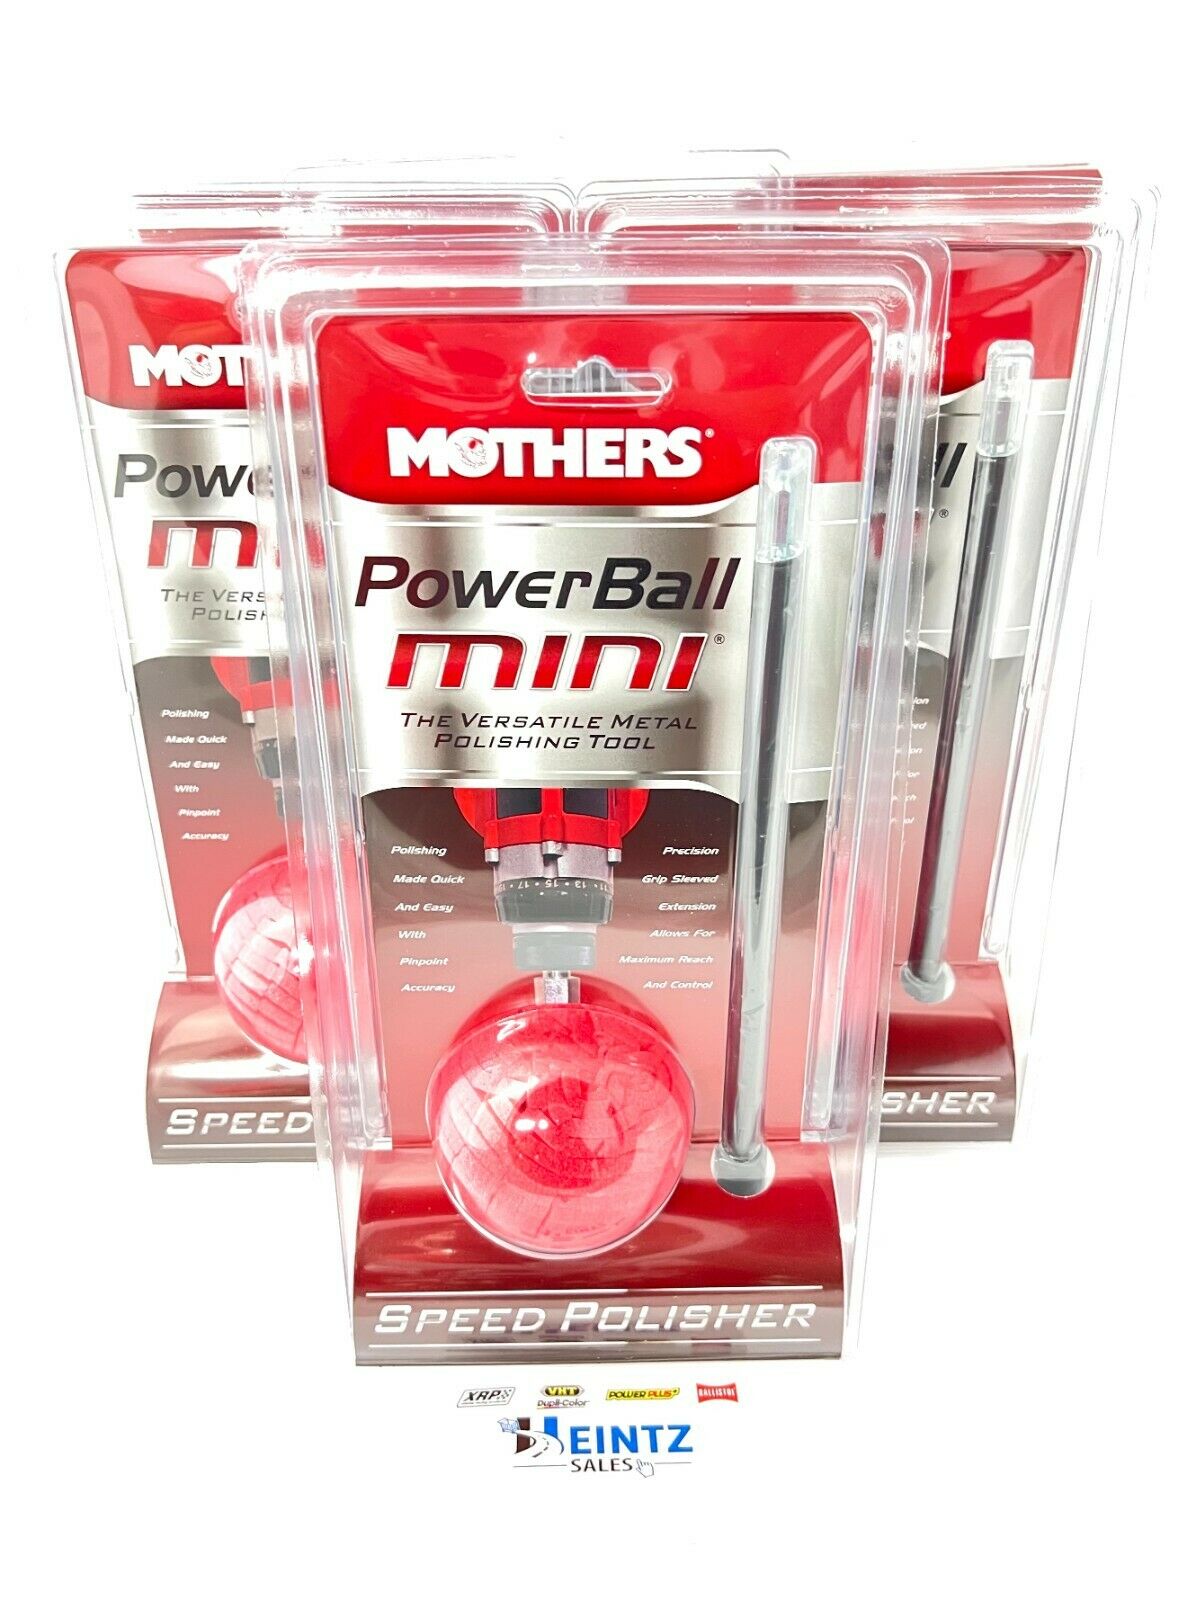 MOTHERS 05141 Powerball Mini 6 PACK - 10" Quick Swap Bit Extension - Polisher